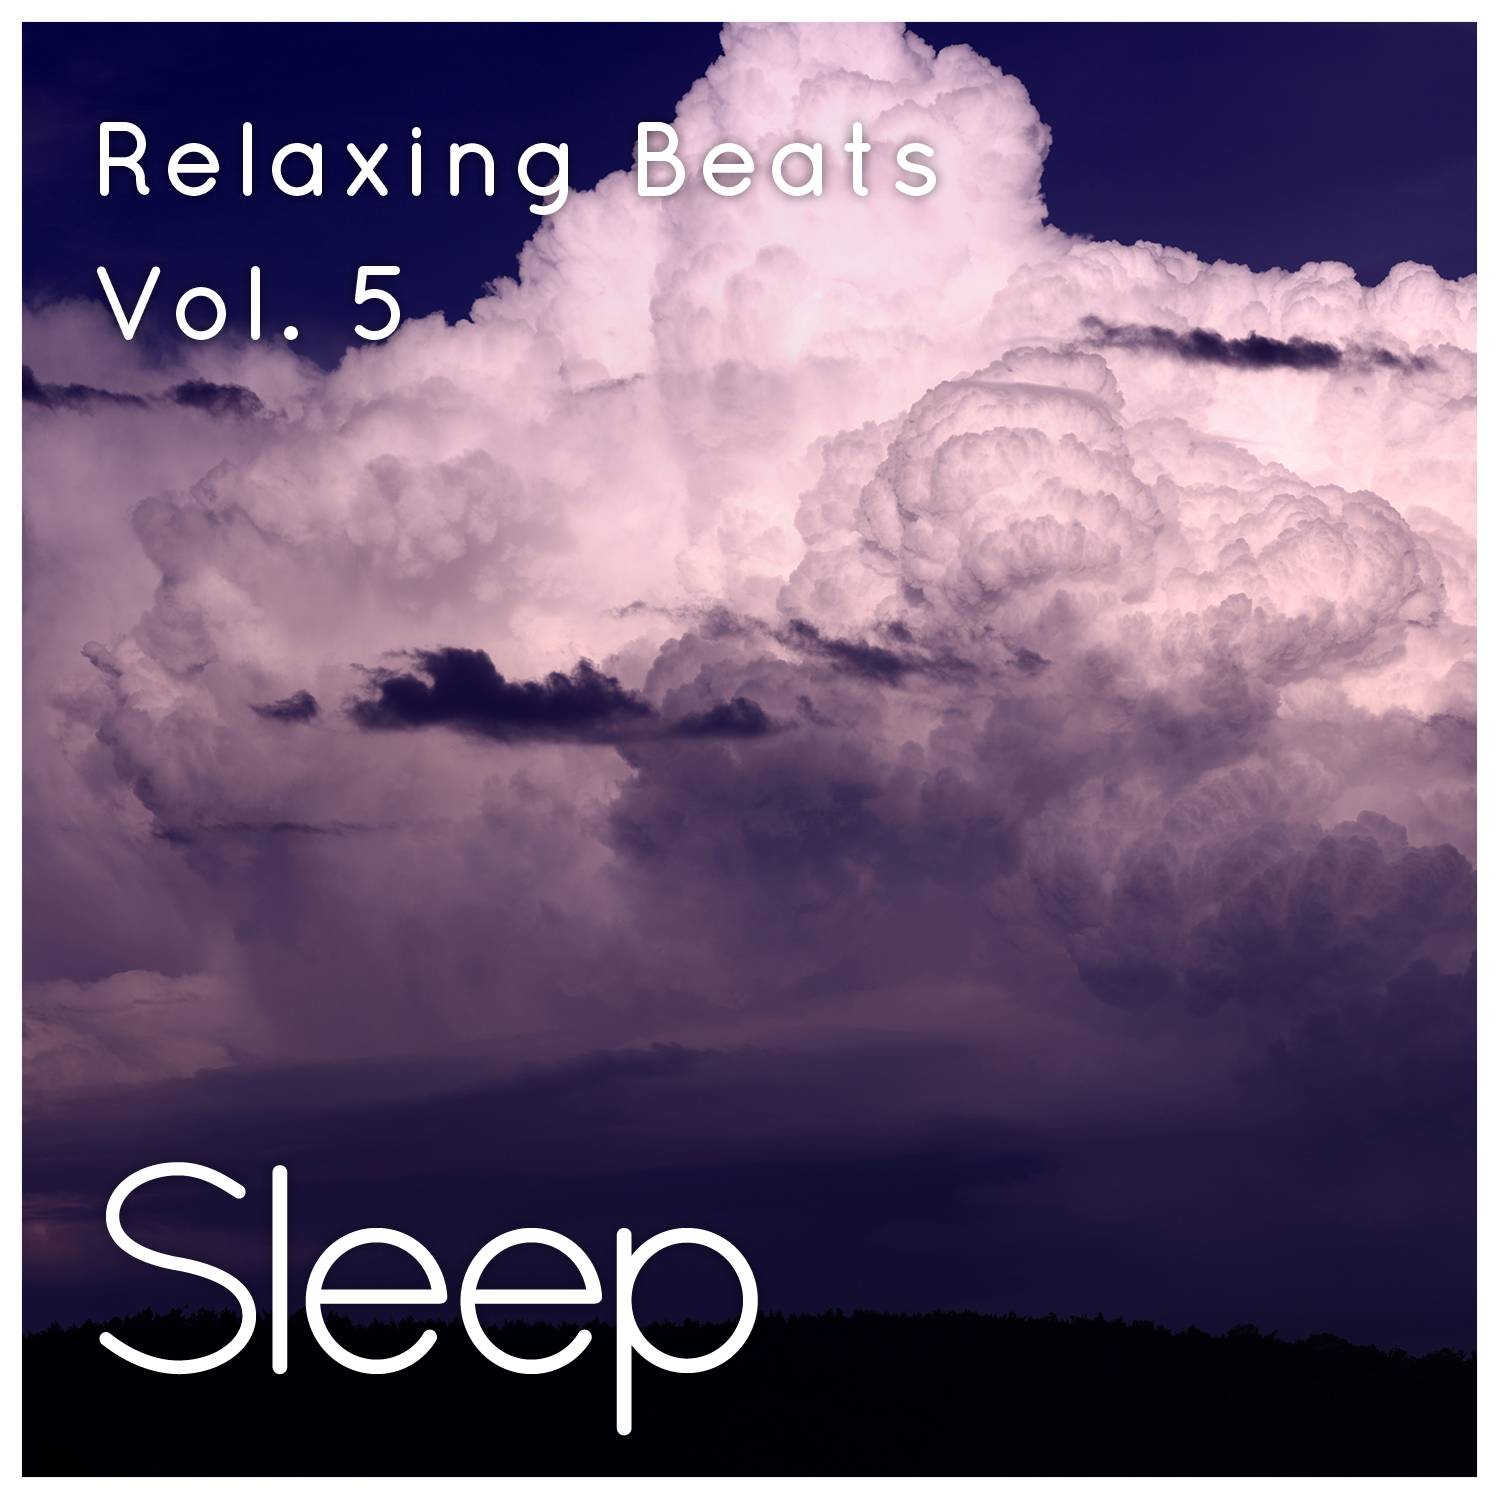 Relaxing Ambient Sleep Sounds, Pt. 24